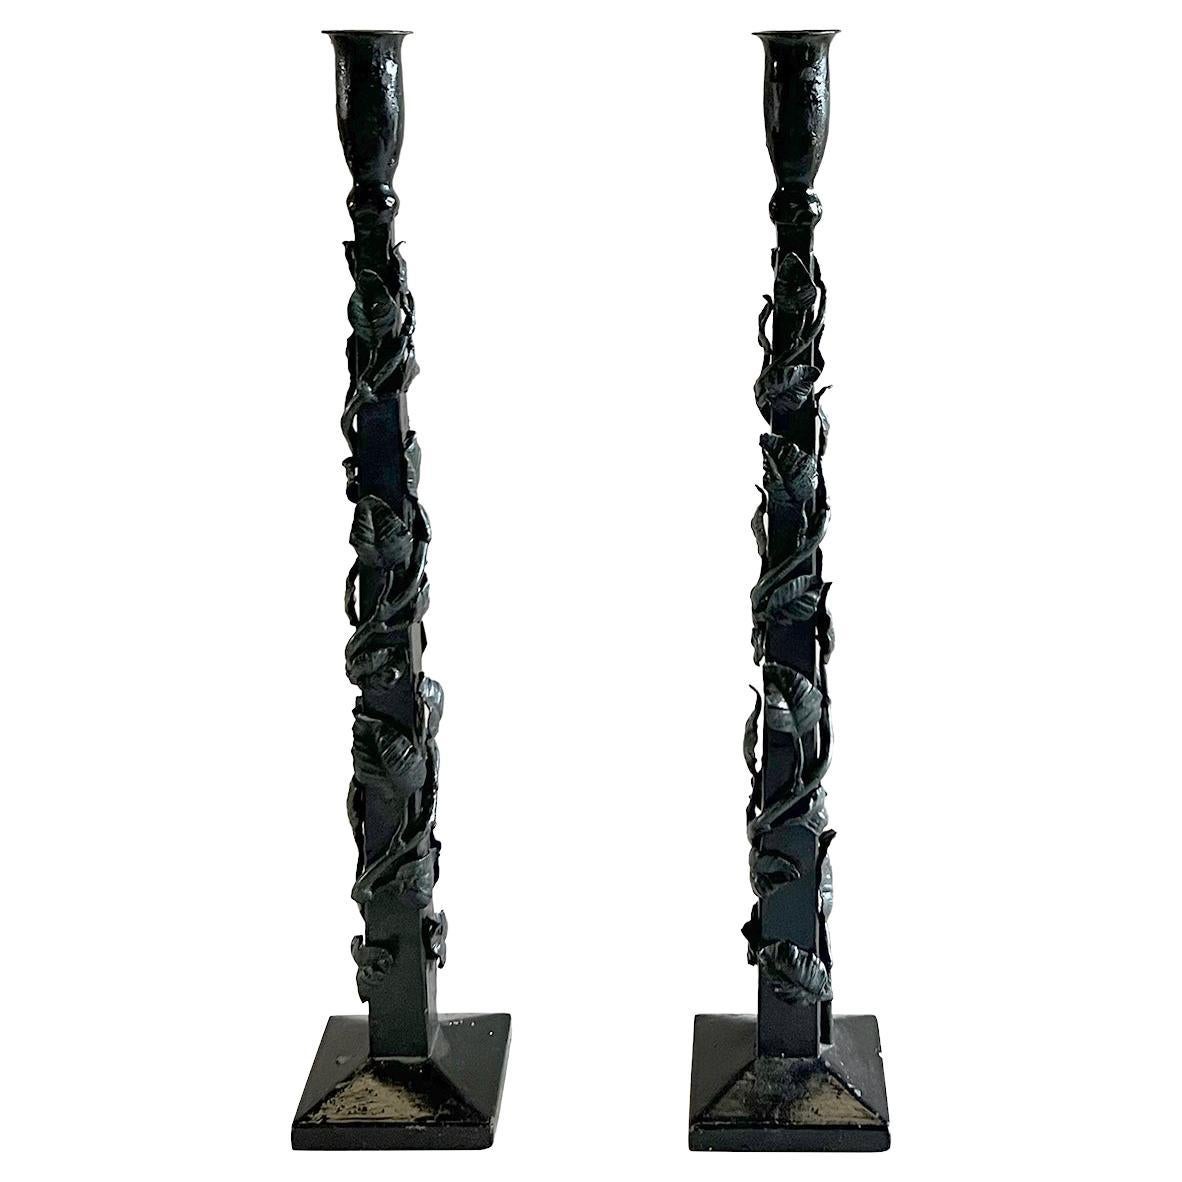 20th Century French Pair of Brutalist Candle Holders, Wrought Iron Sticks